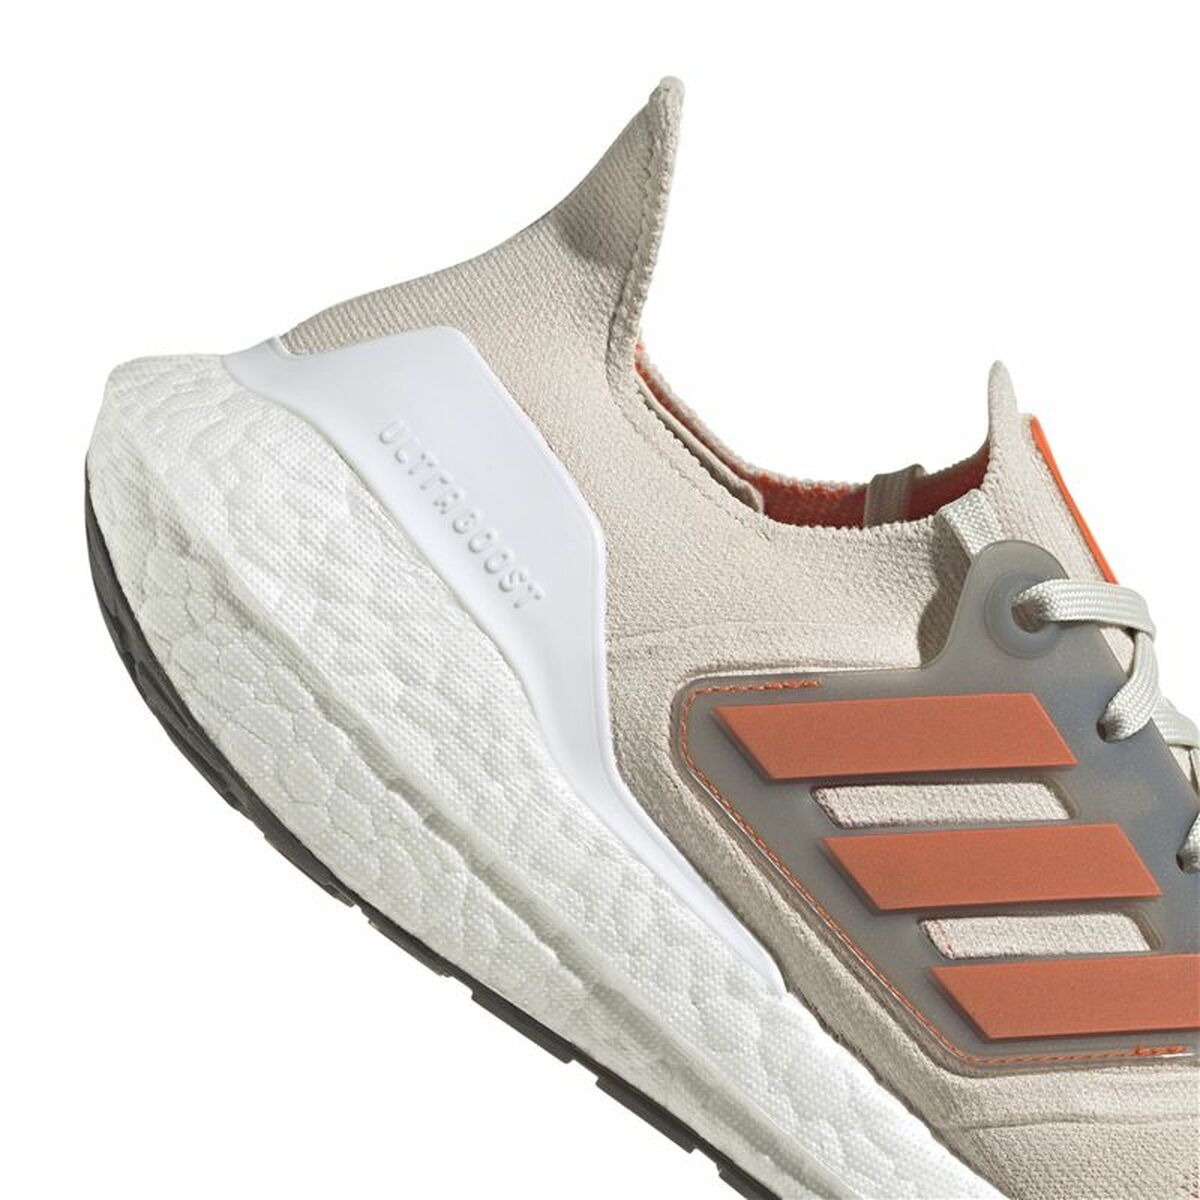 Running Shoes for Adults Adidas Ultraboost 22 Beige Men